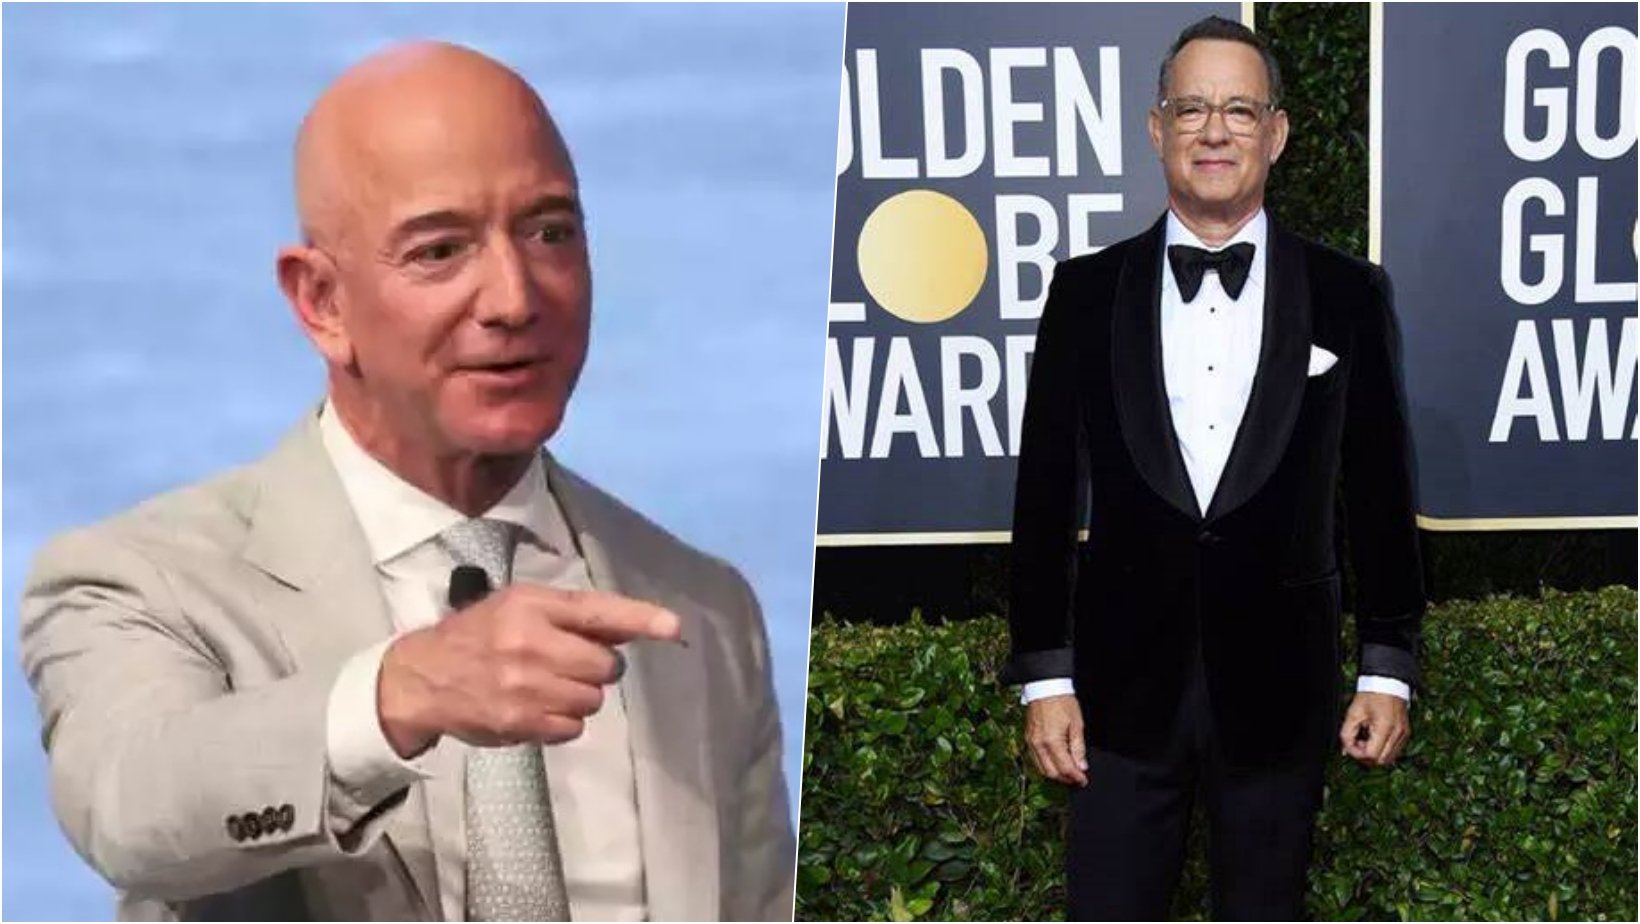 6 facebook cover 3.jpg?resize=412,232 - Tom Hanks Reveals The Reason Why He Turned Down Jeff Bezos’ Offer To Go To Space